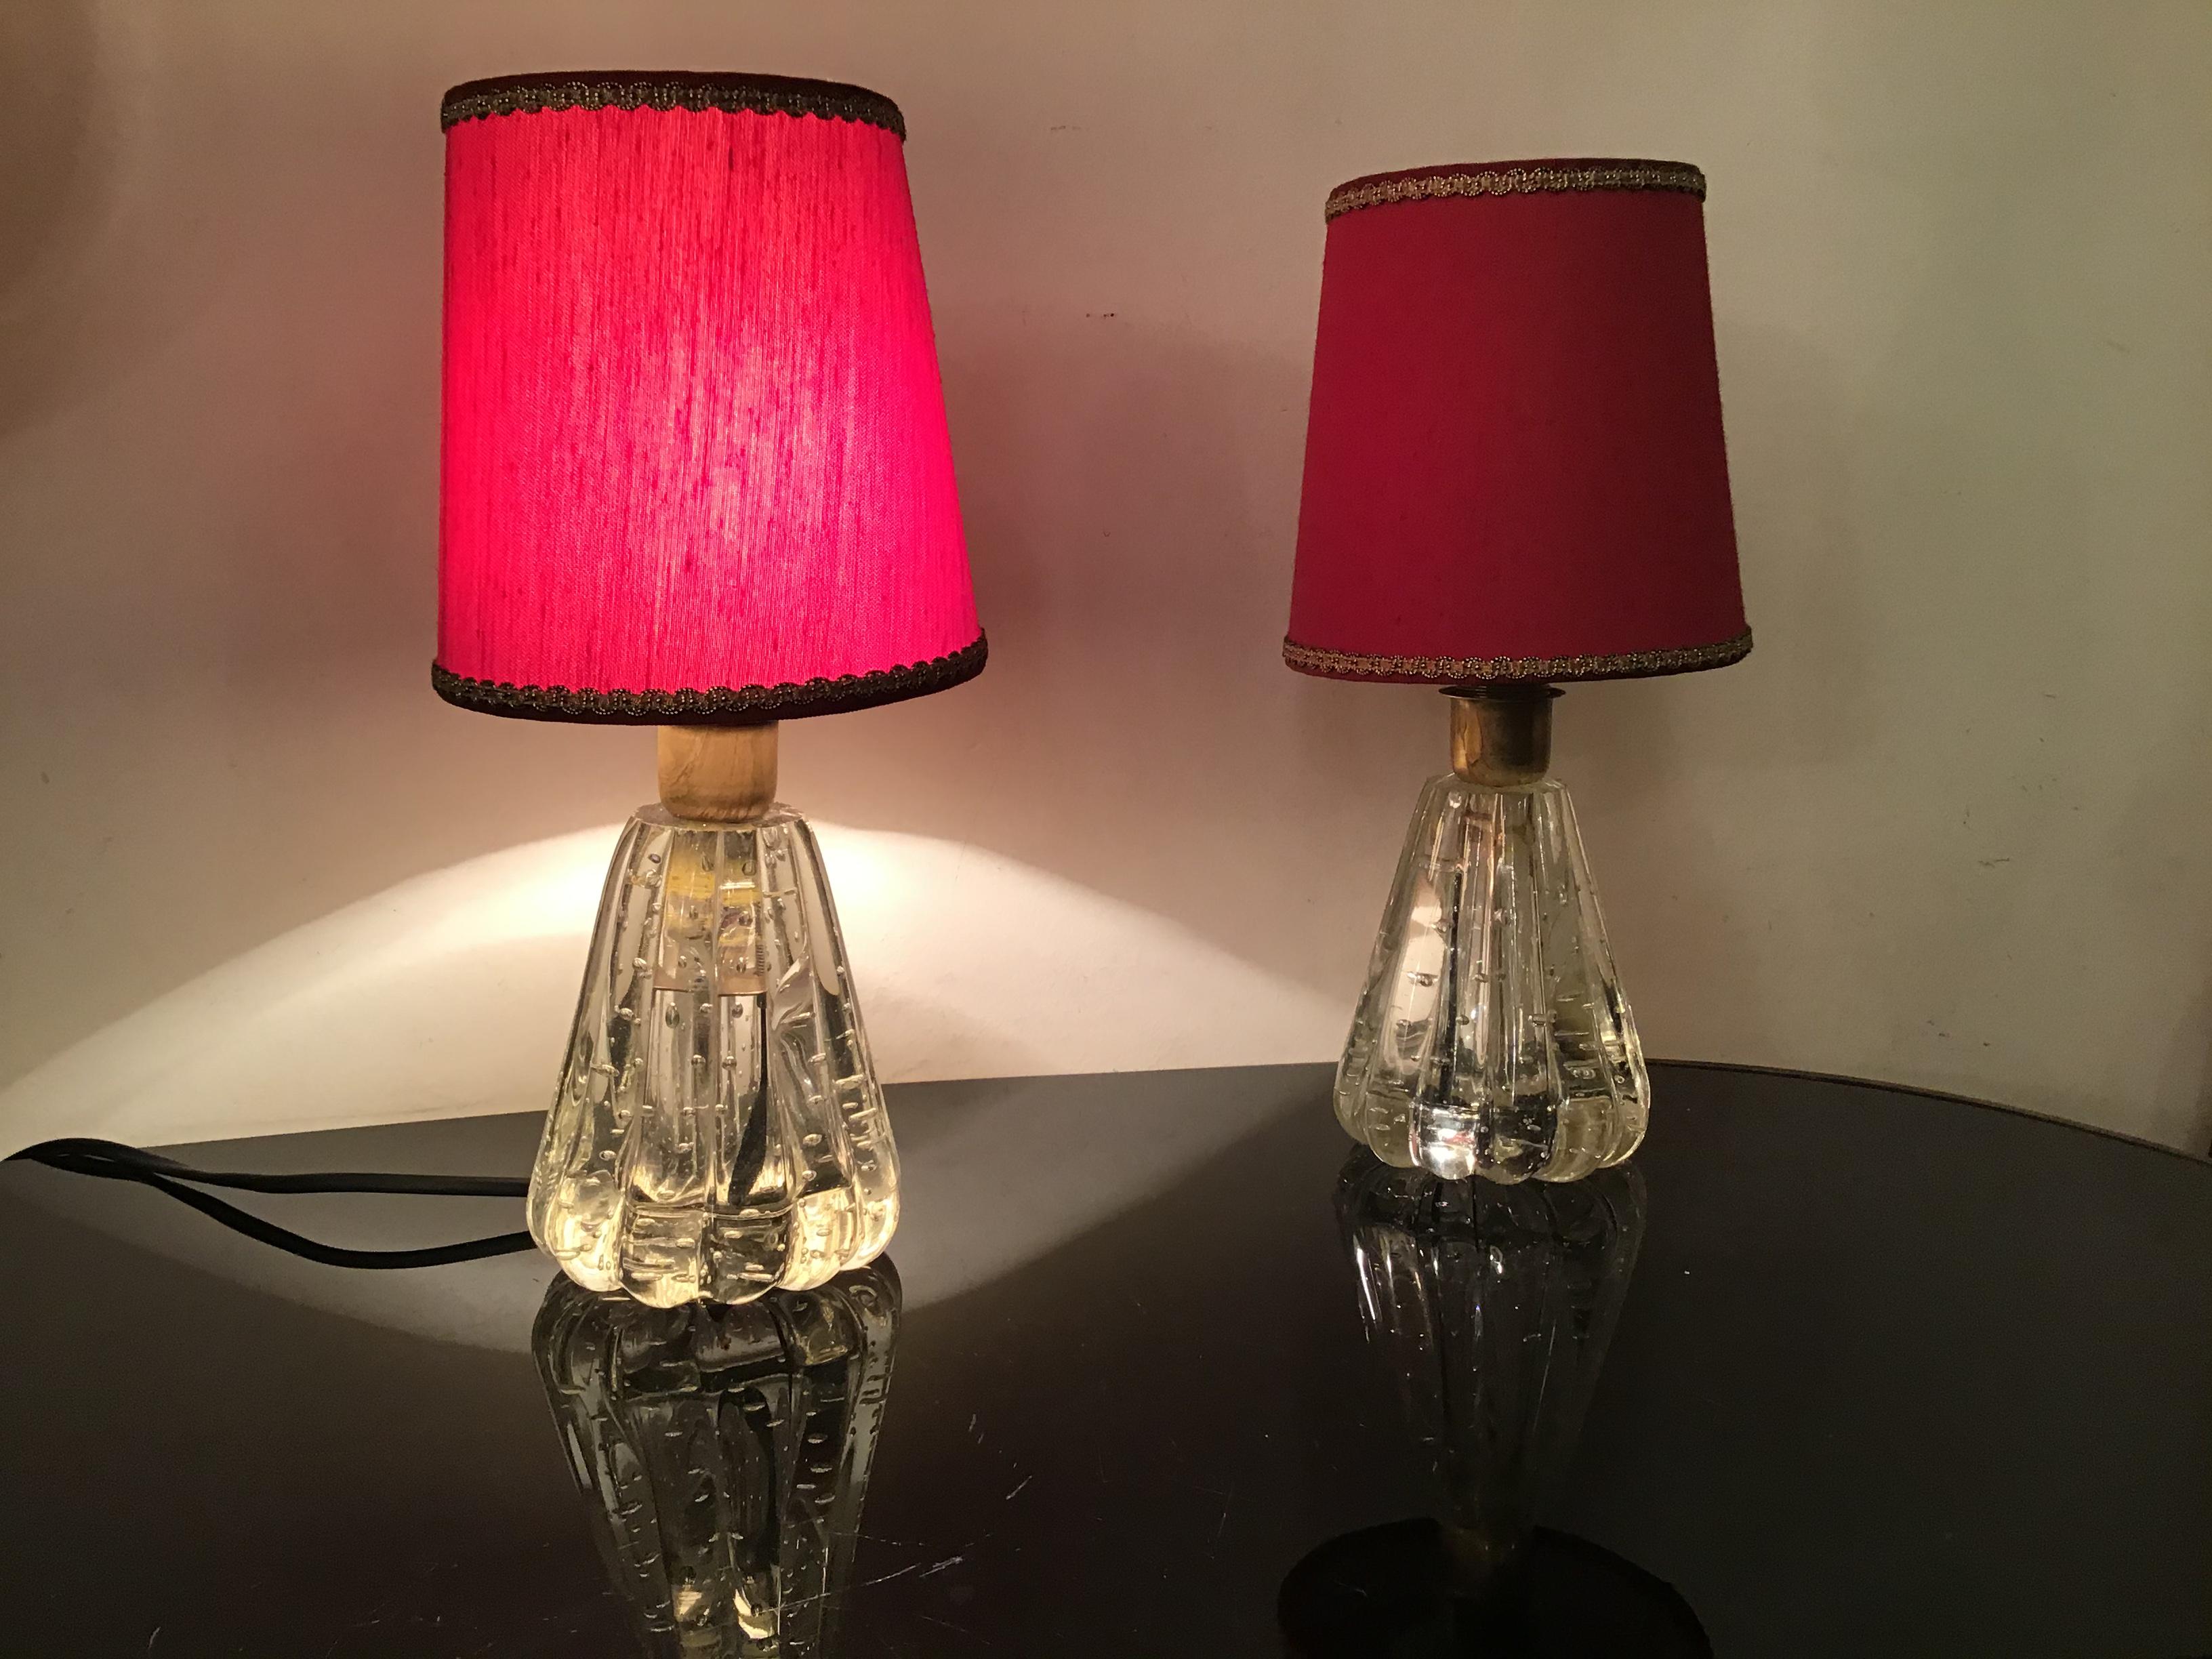 Barovier e Toso Table Lamps Murano Glass Brass Fabric Lampshade 1940 Italy For Sale 3